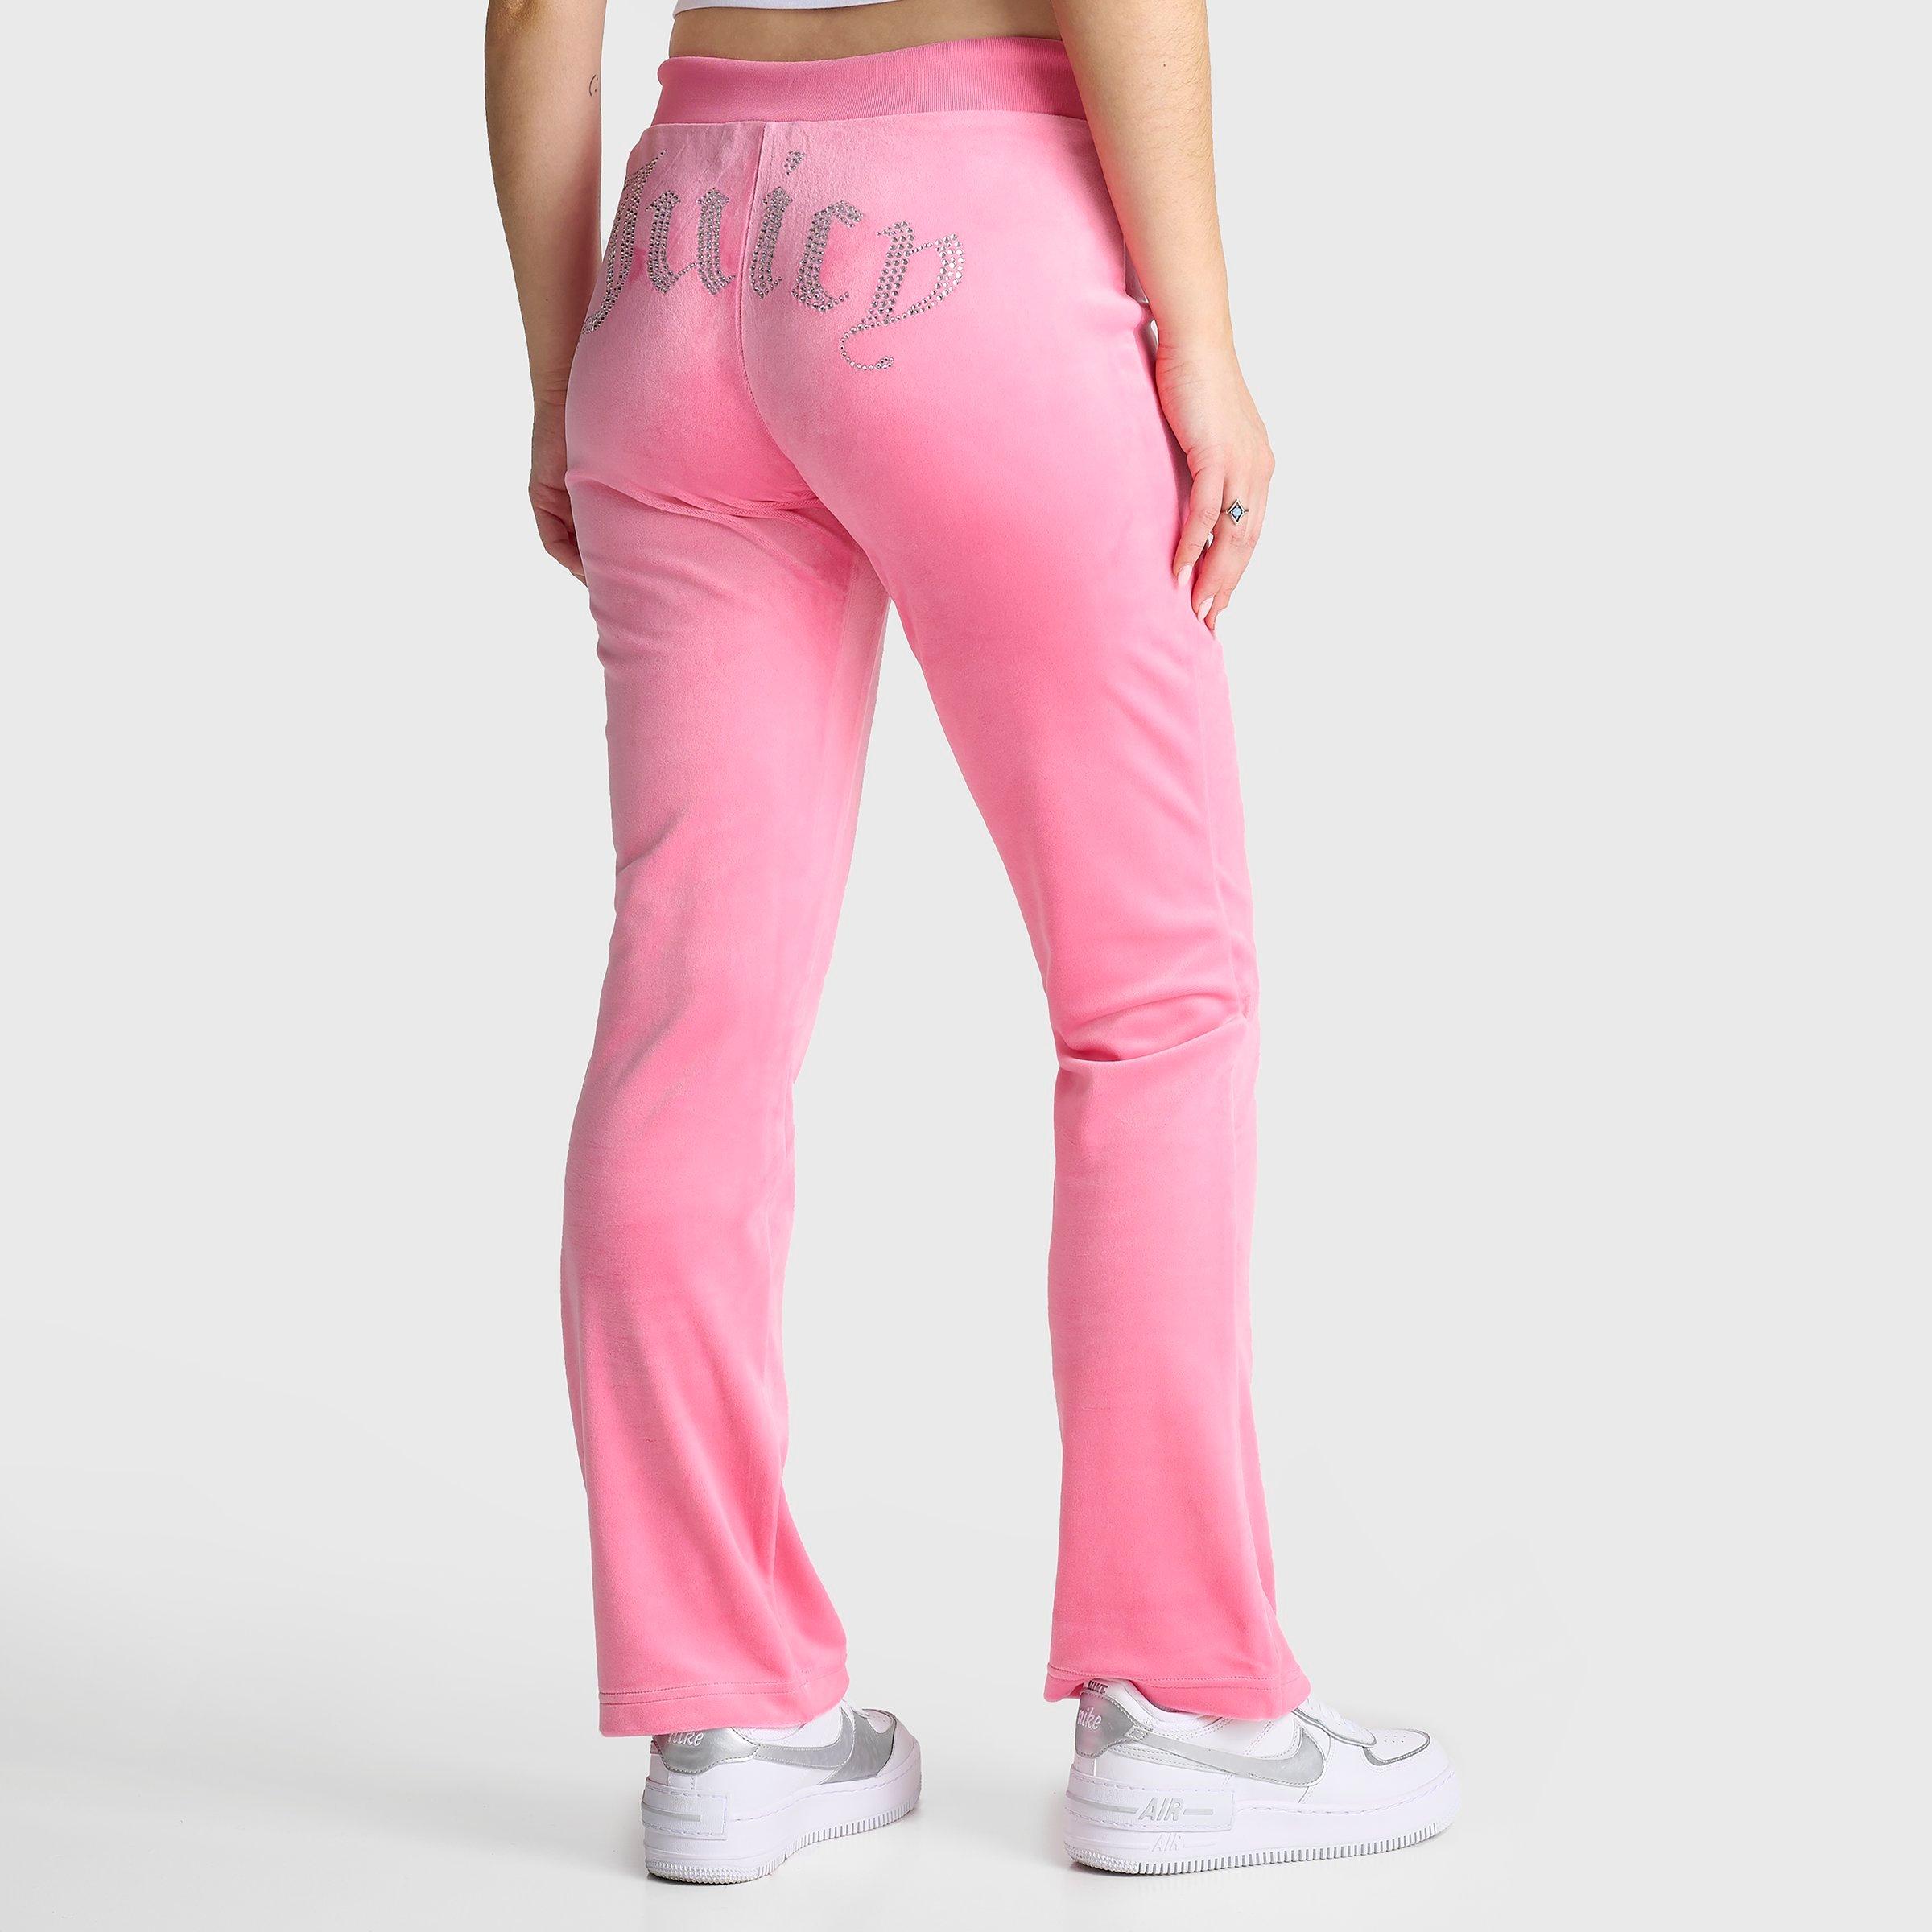 Juicy Couture Women's Og Big Bling Velour Track Pants In Hot Hot